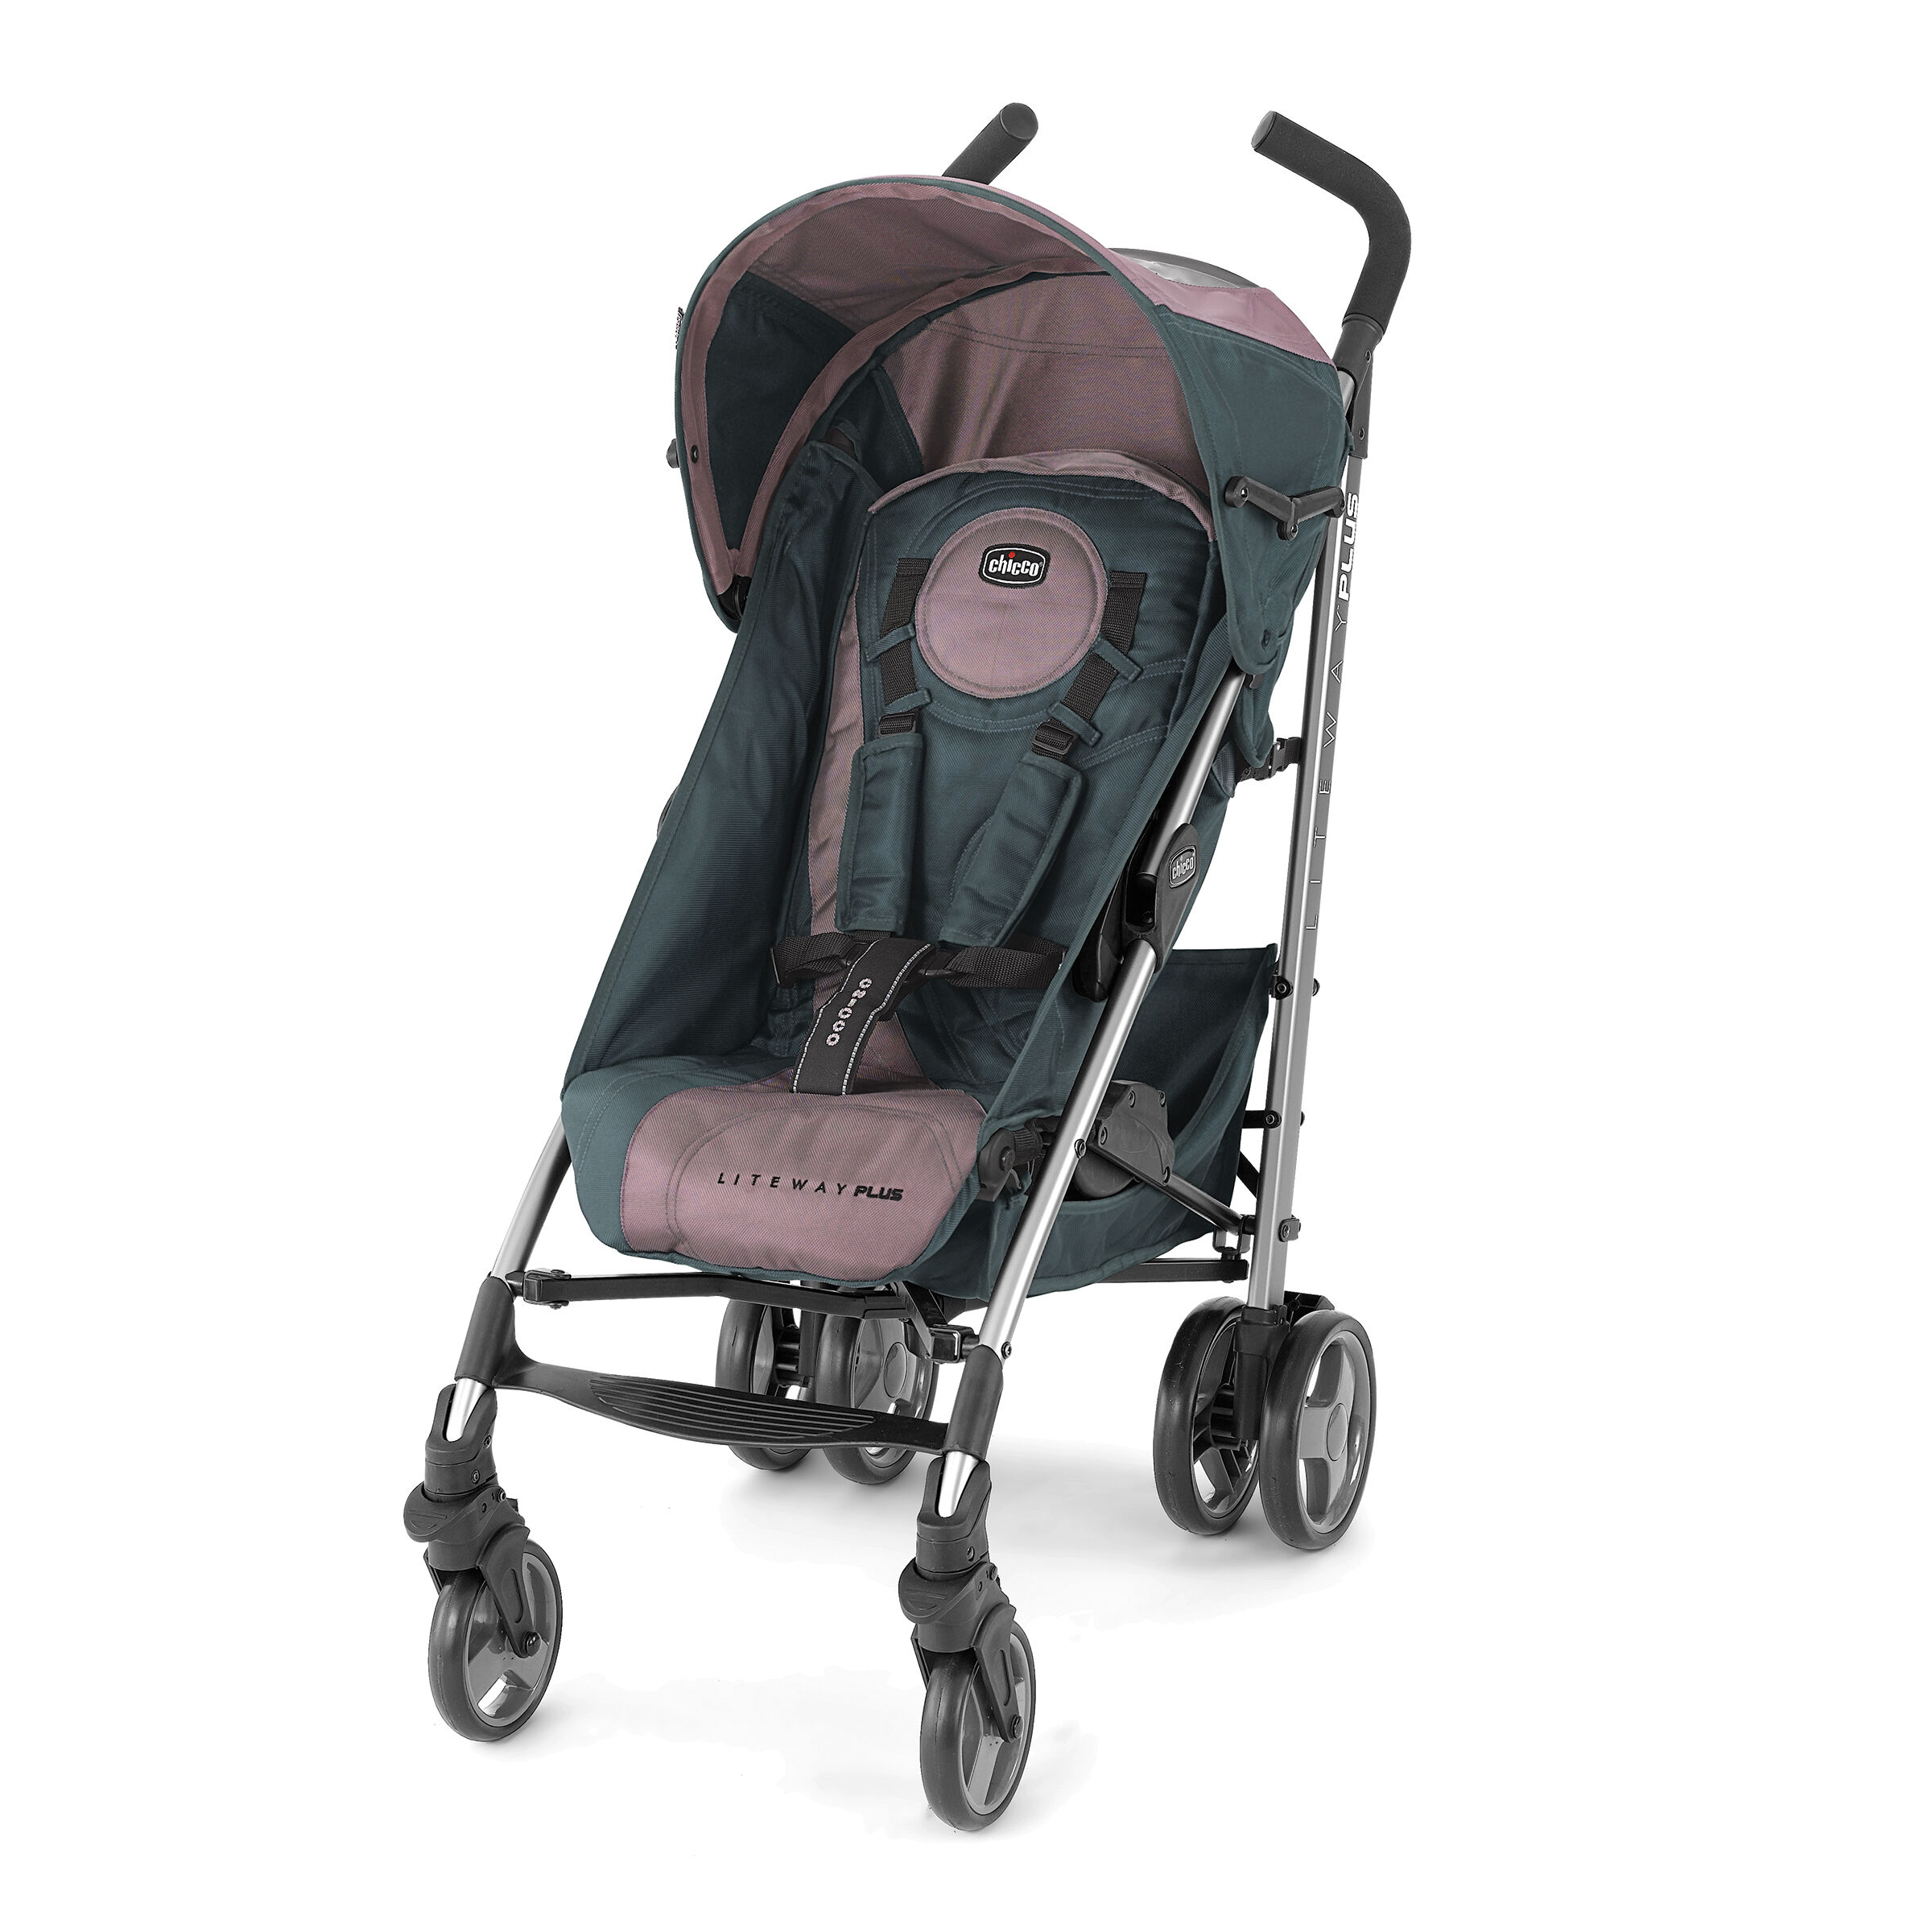 chicco liteway plus weight